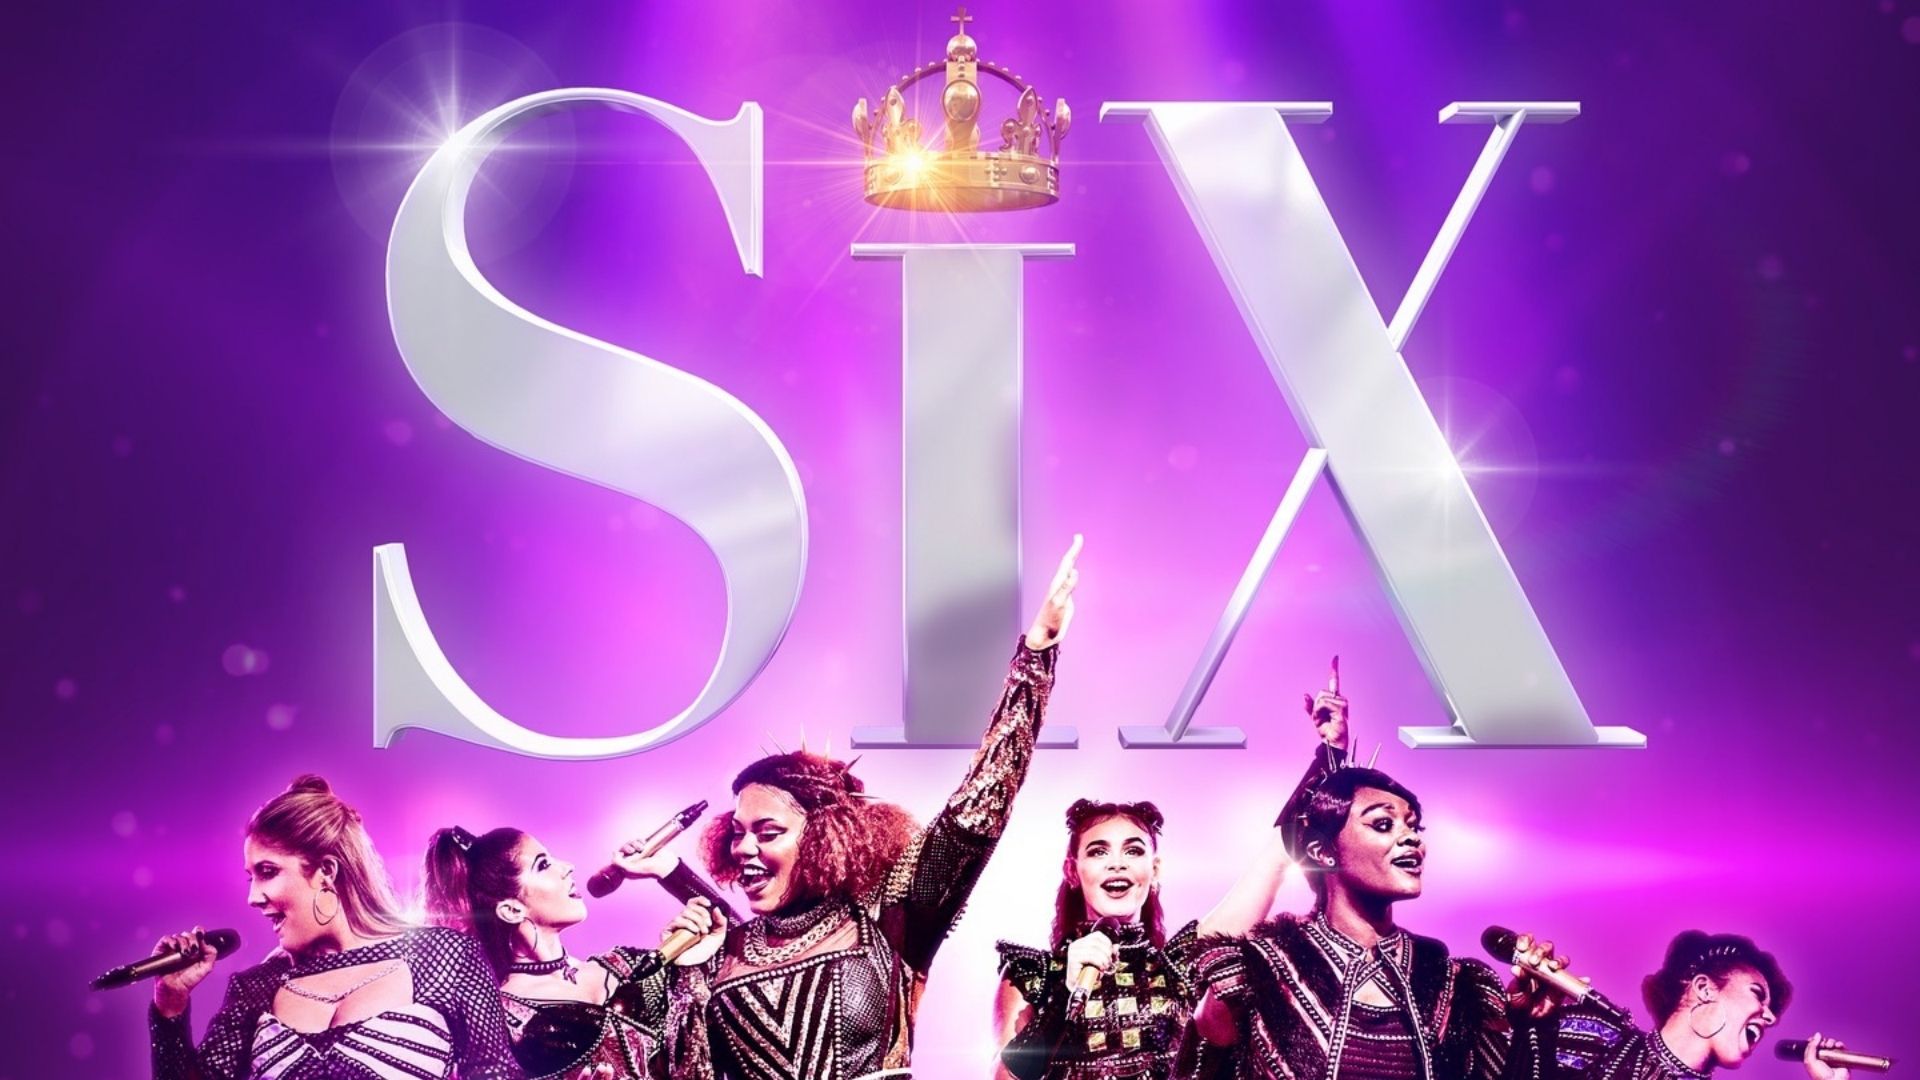 Six The Musical Photo Credit: Six the Musical on Facebook. 